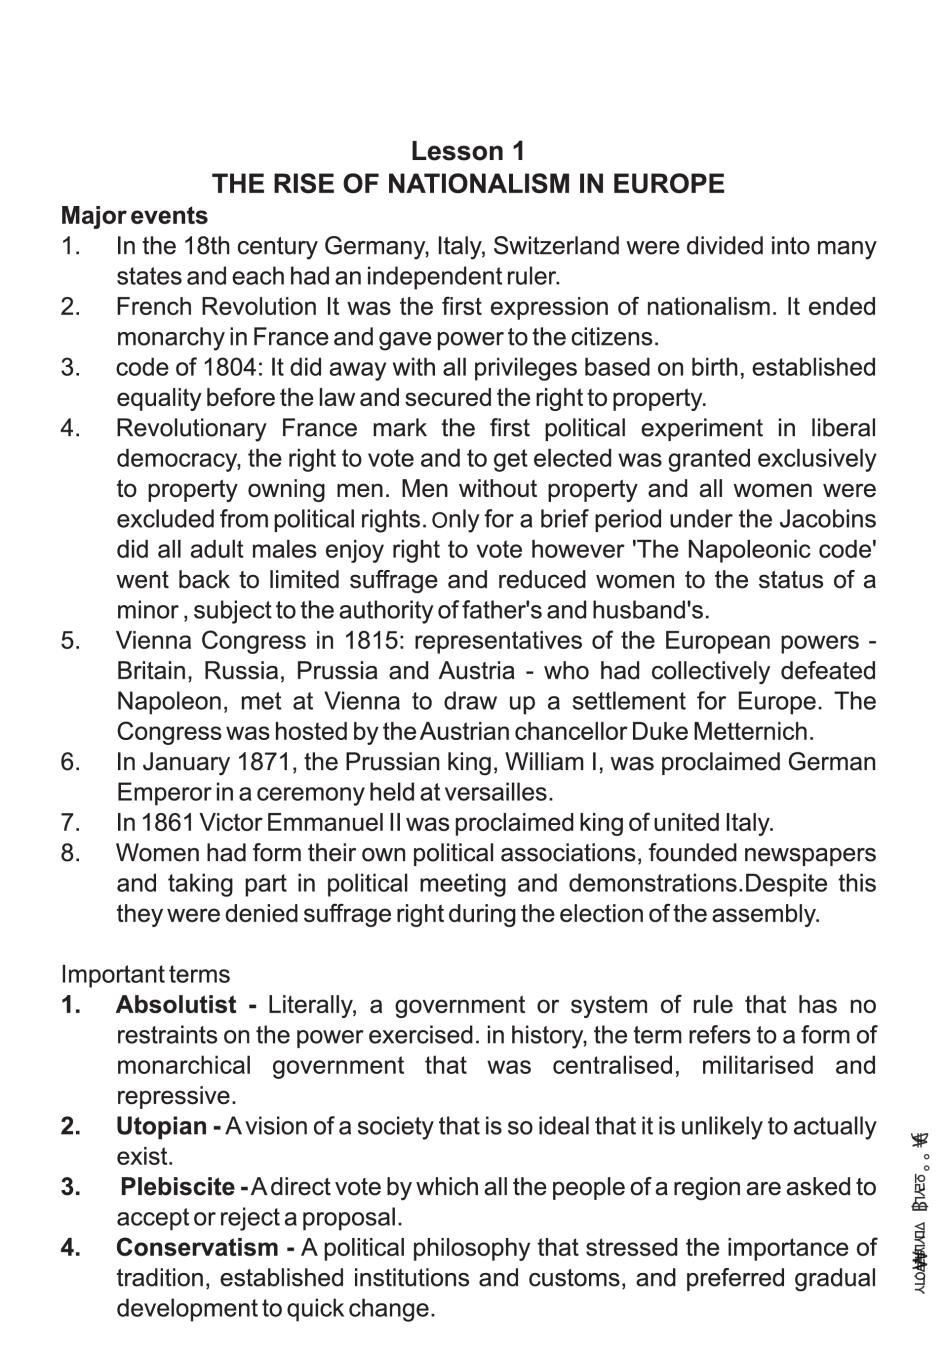 assignment on nationalism in europe class 10